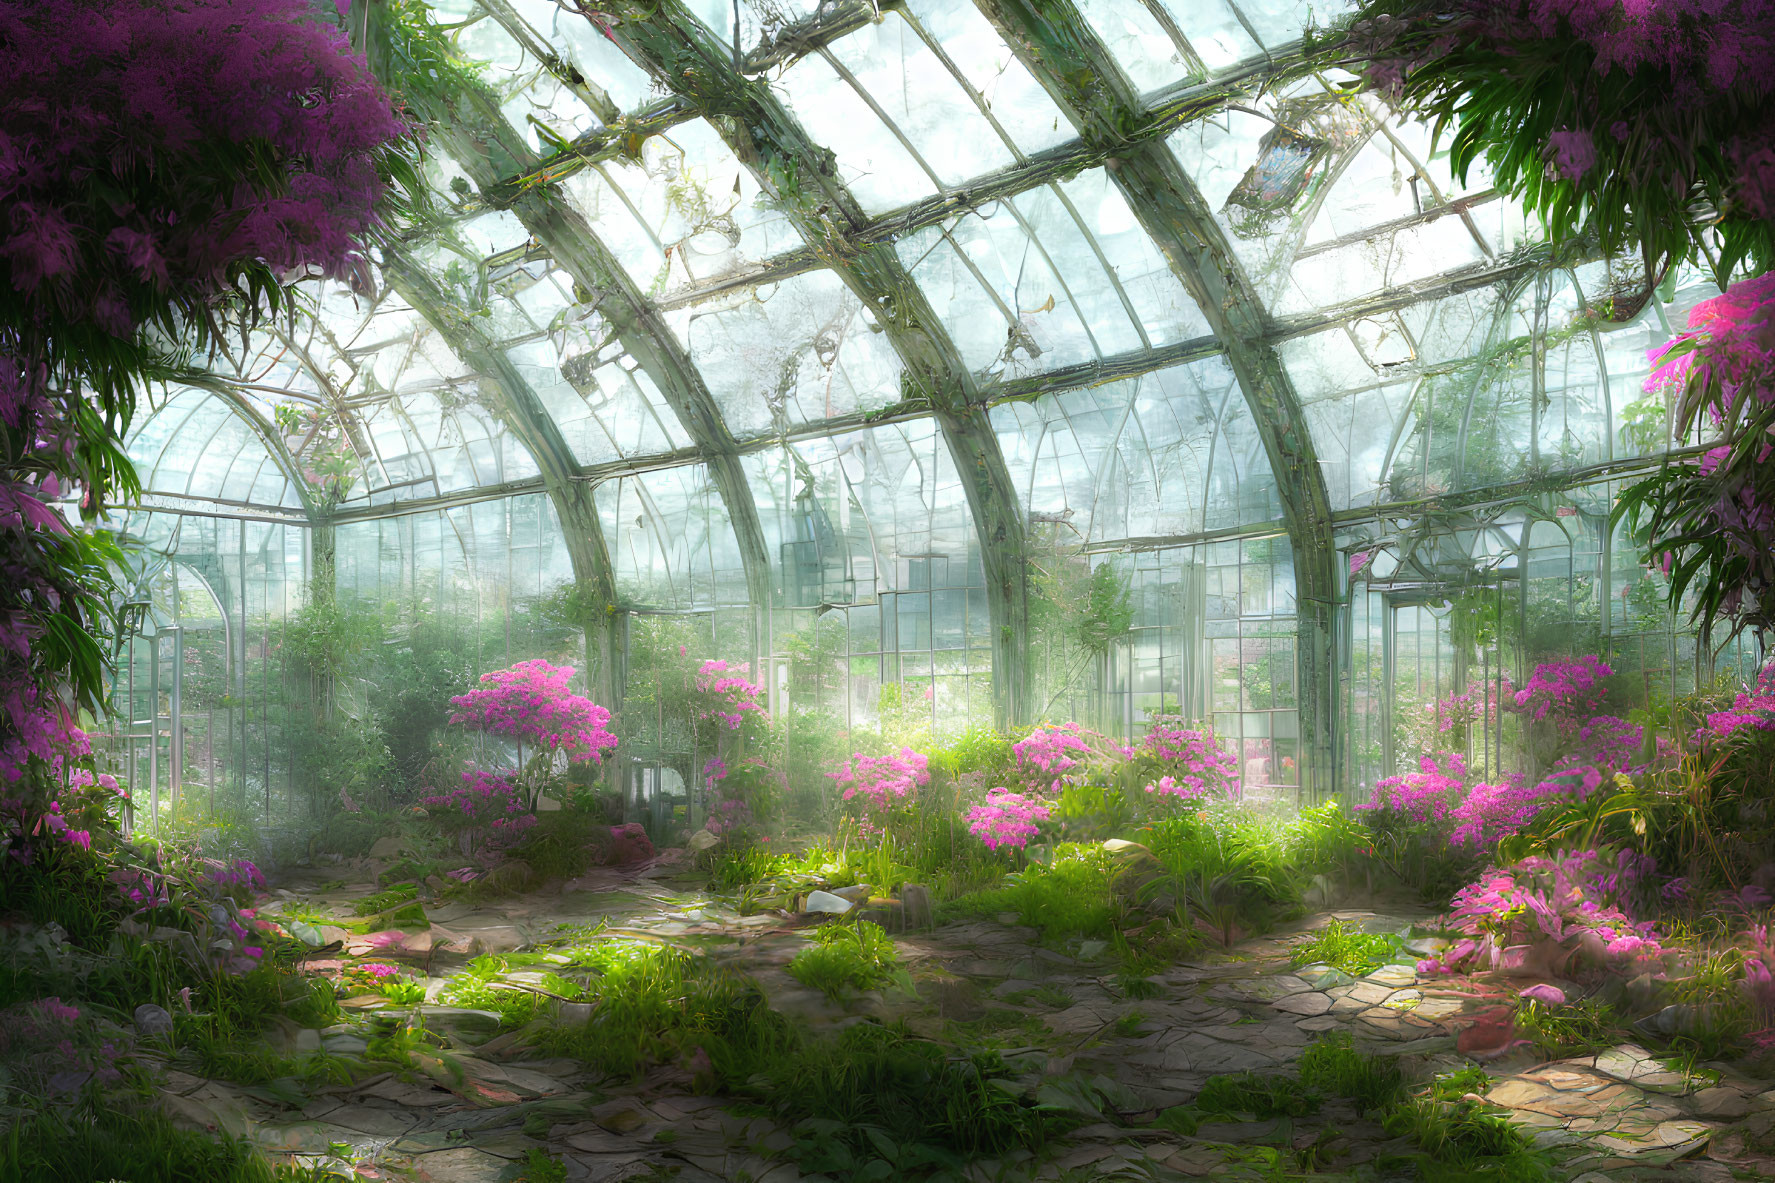 Lush Greenery and Pink Flowers in Overgrown Greenhouse